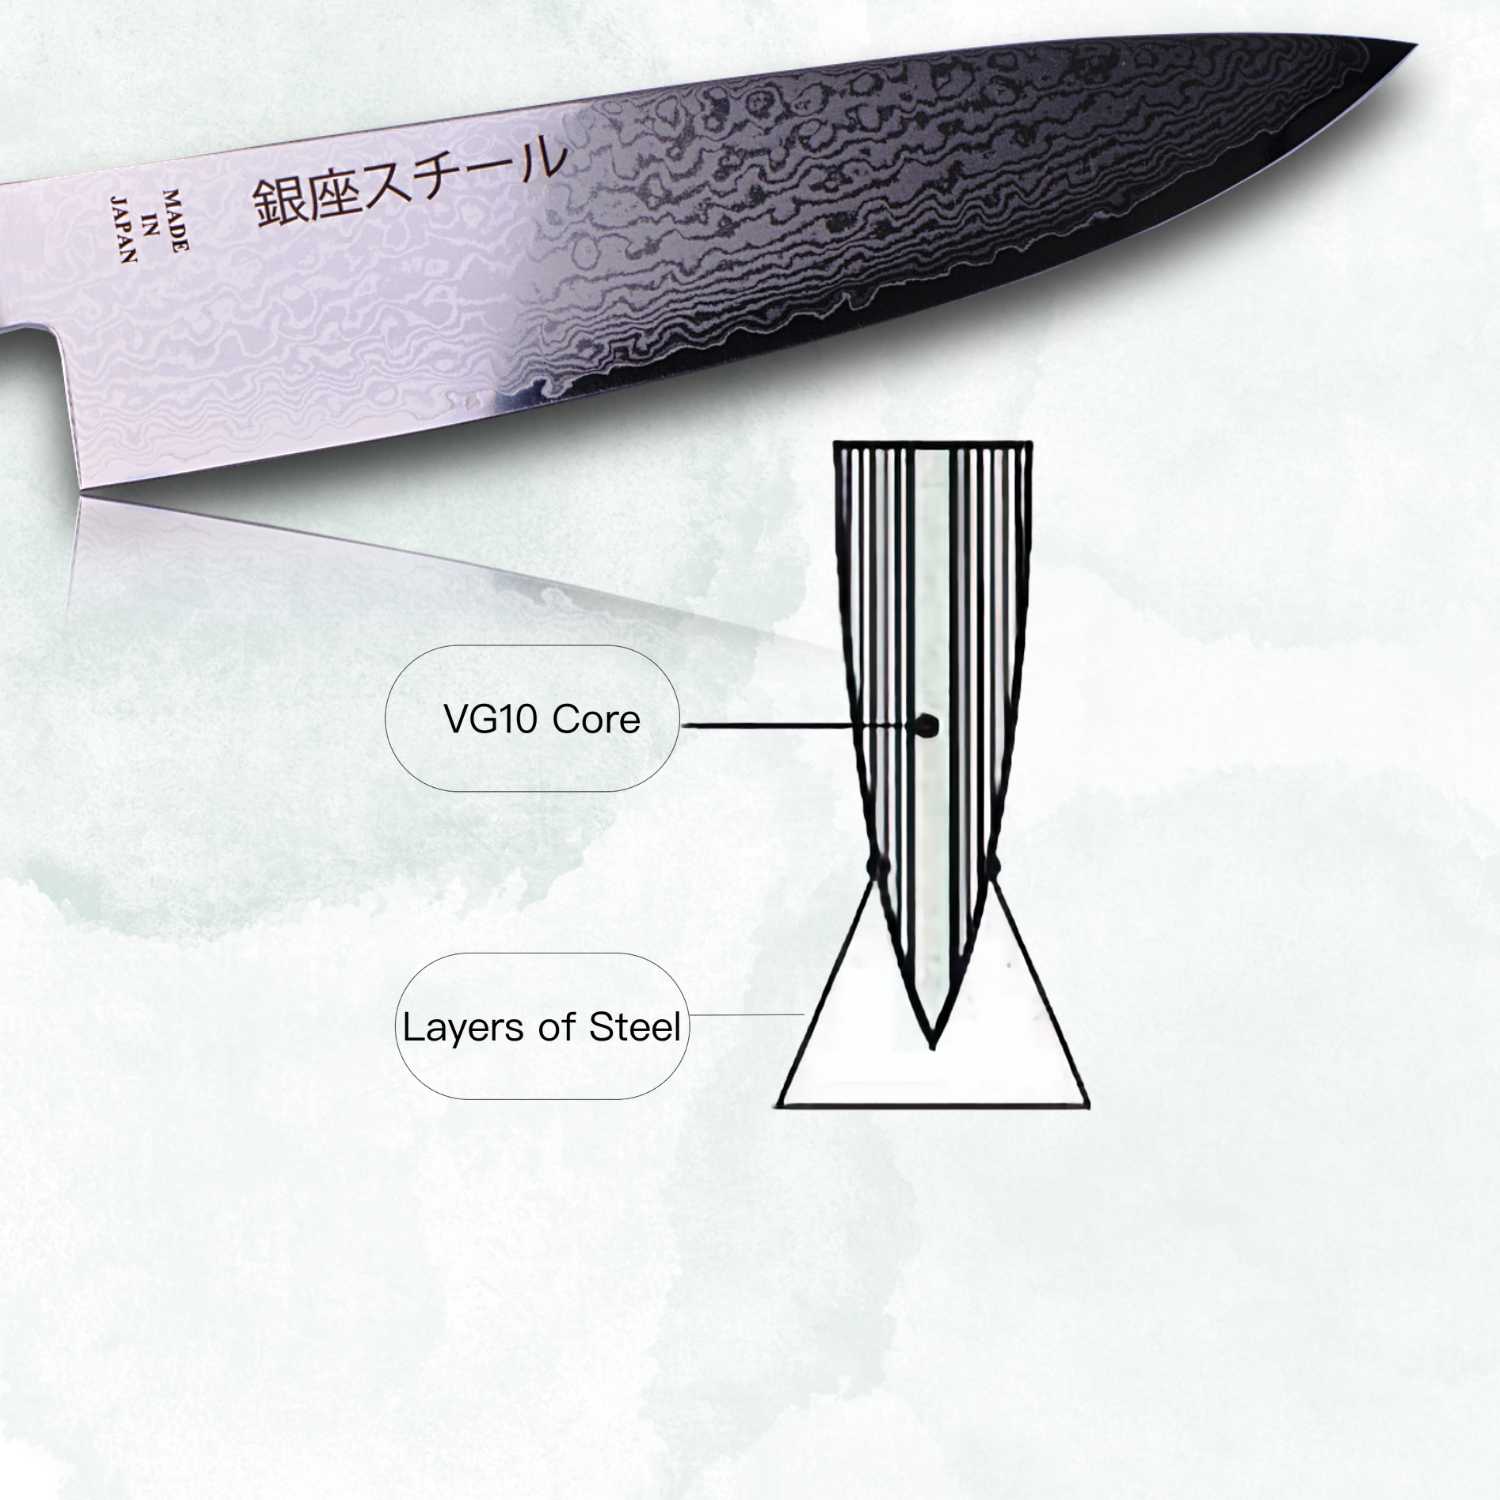 Best material for kitchen knives. Cobalt is added to this material, so this blade have excellent sharpness and durability.